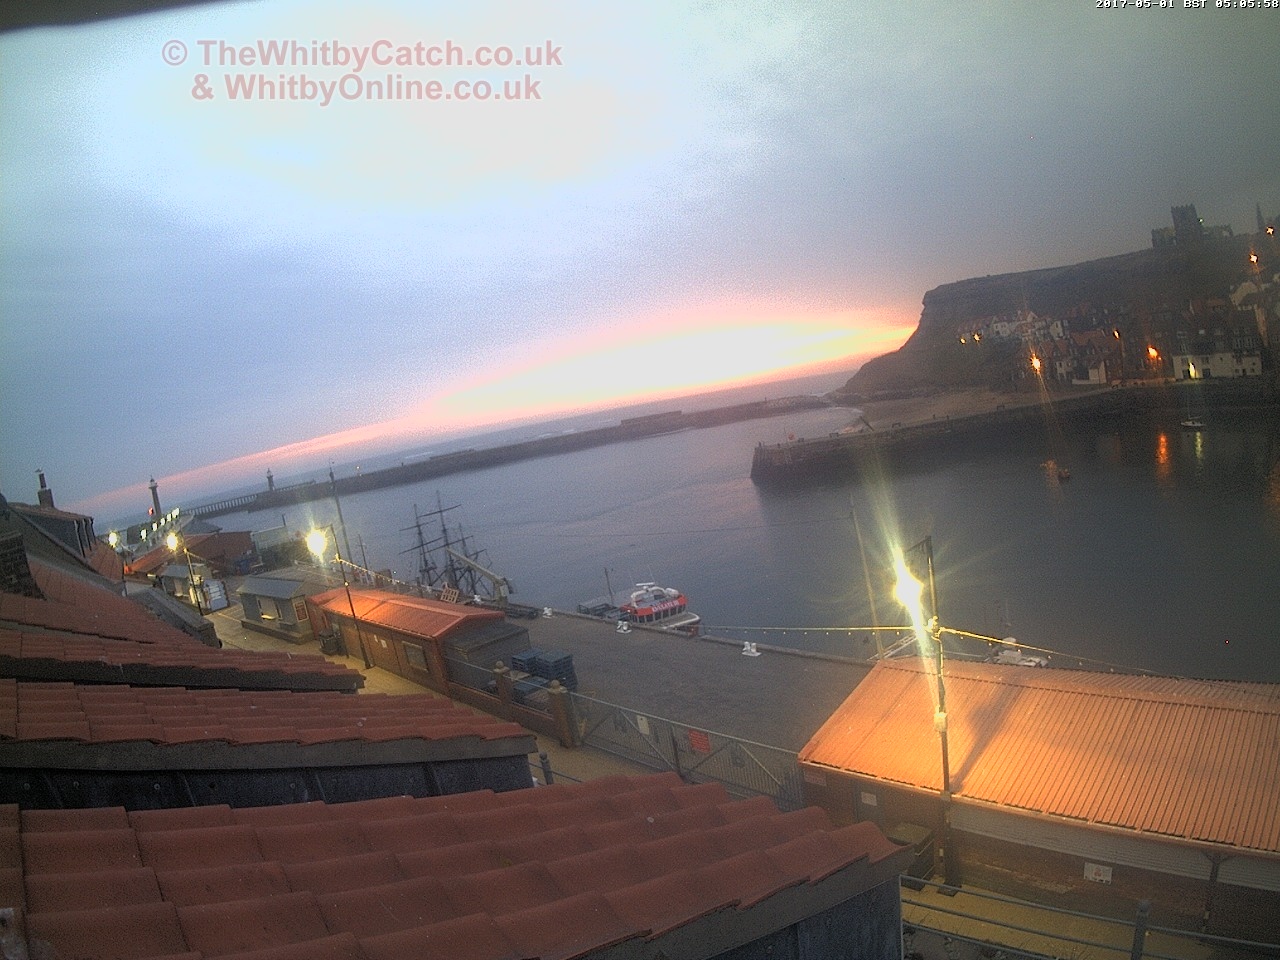 Whitby Mon 1st May 2017 05:06.